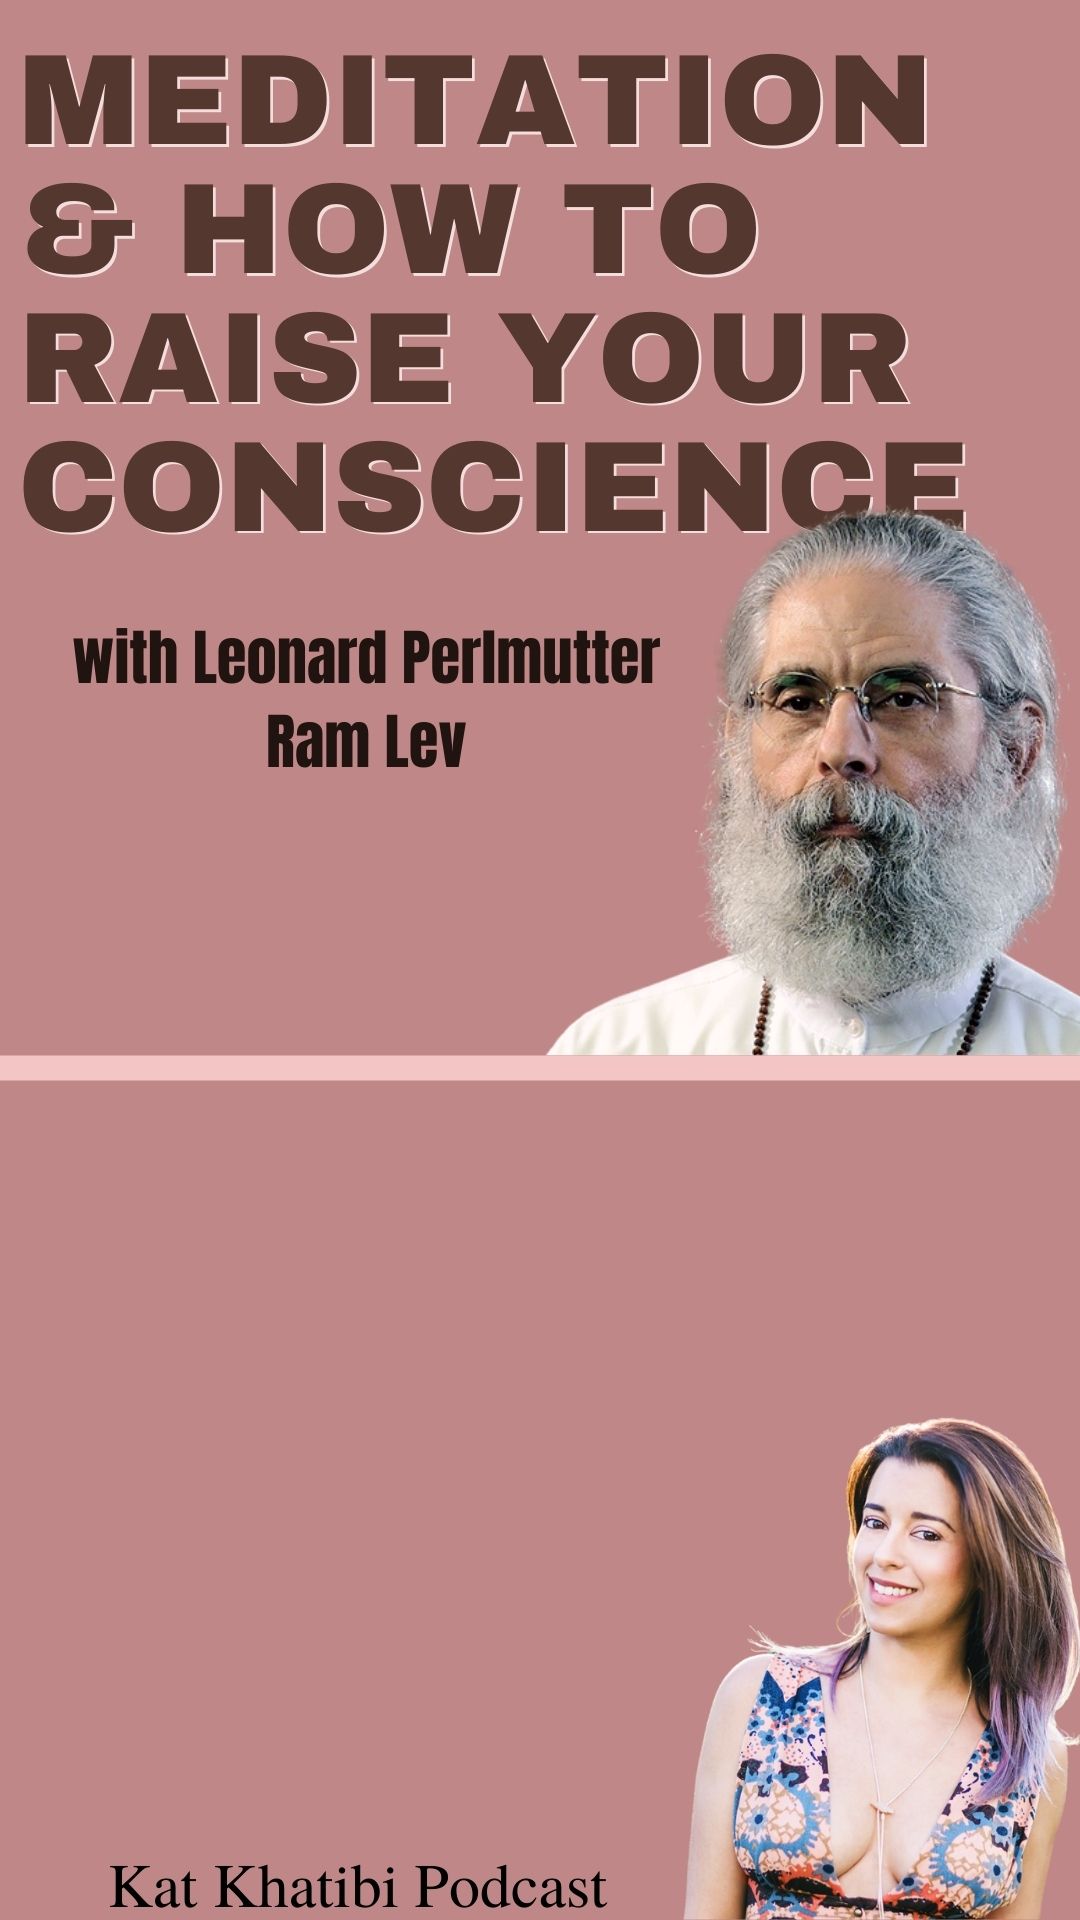 Meditation & How to Raise Your Conscience with Leonard Perlmutter (Ram Lev)